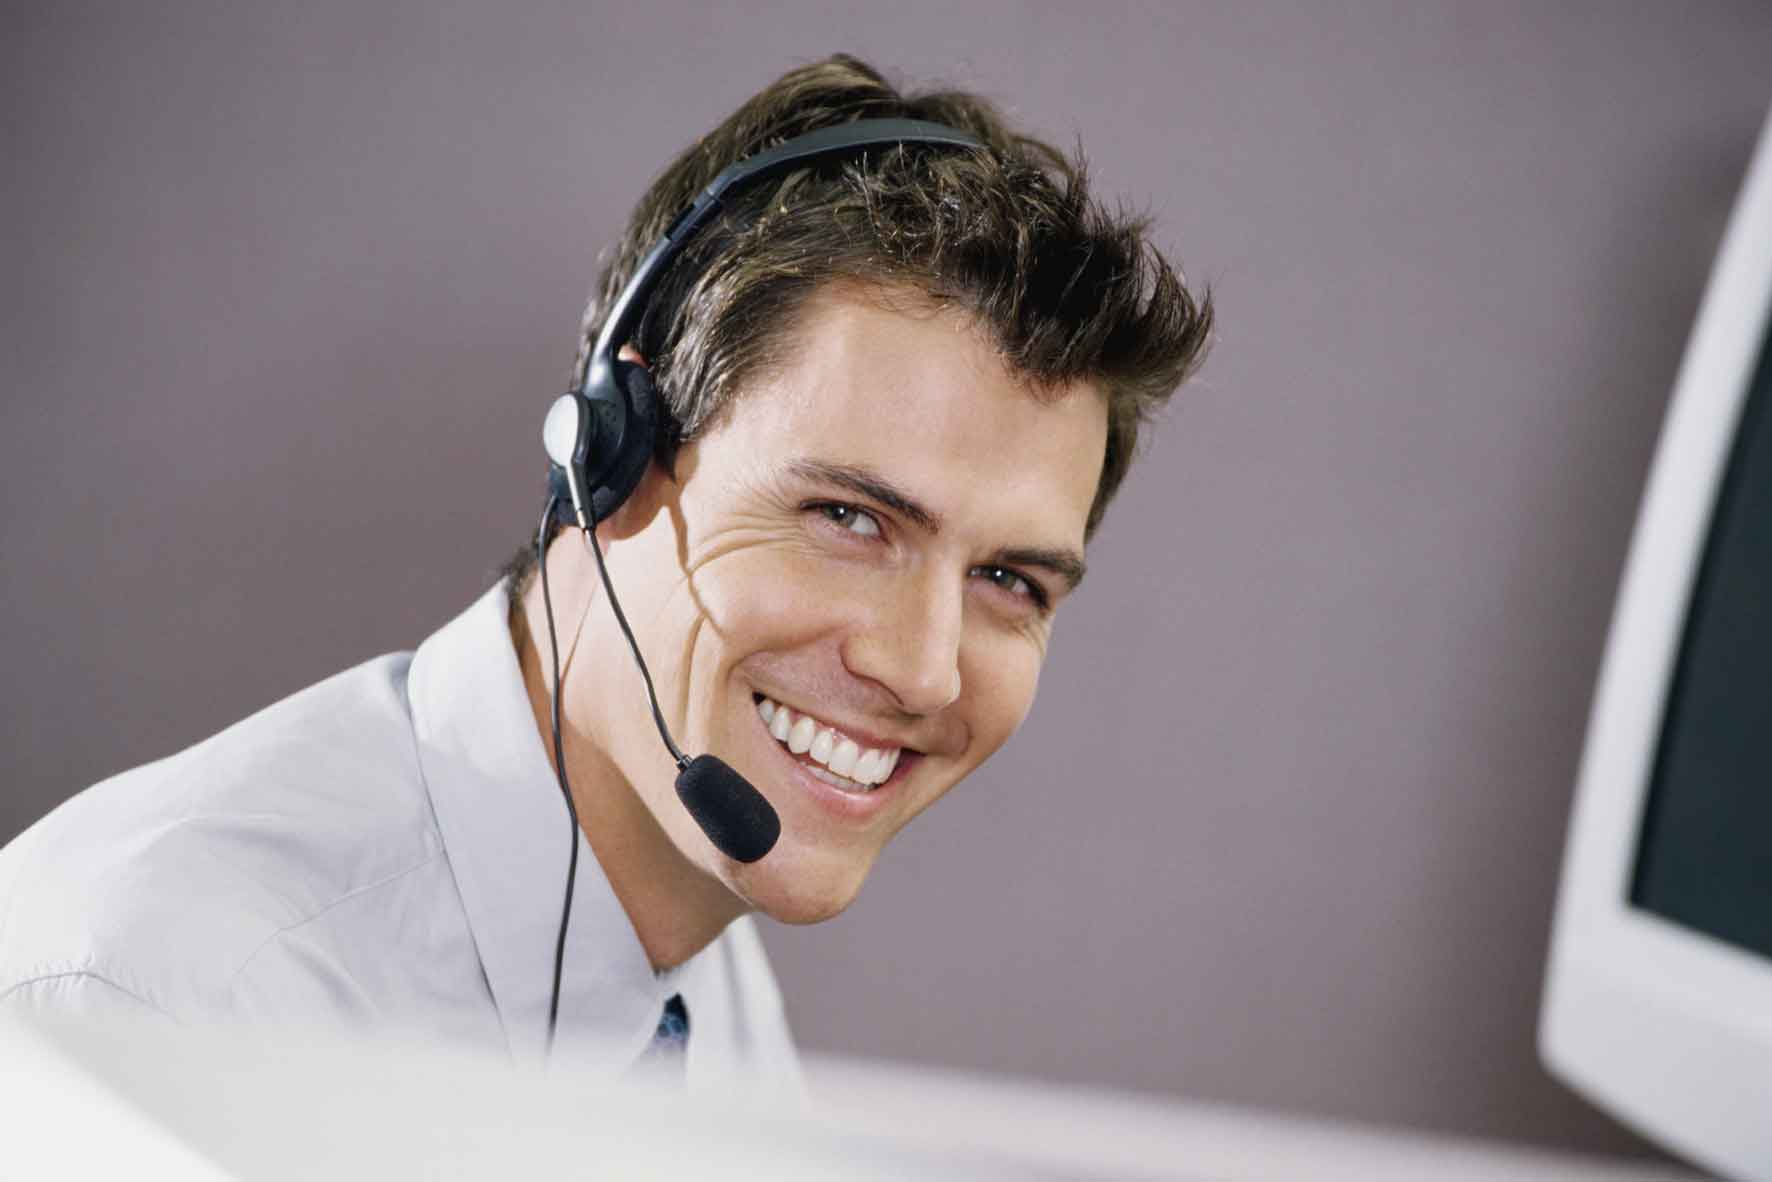 cliniview customer support